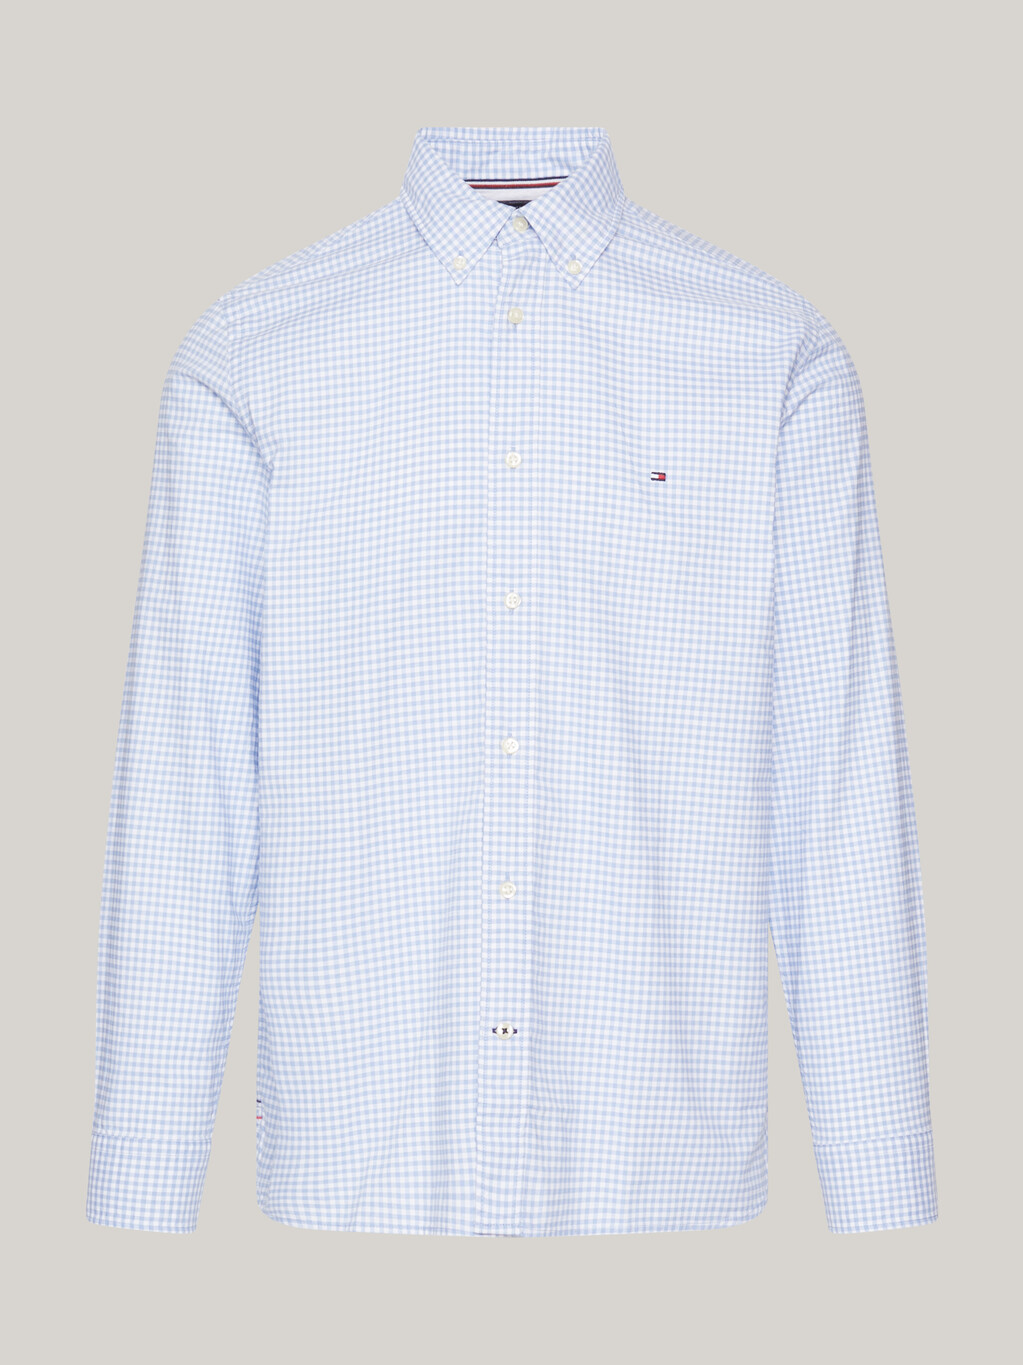 1985 Collection Gingham Regular Oxford Shirt, Cloudy Blue / Optic White, hi-res